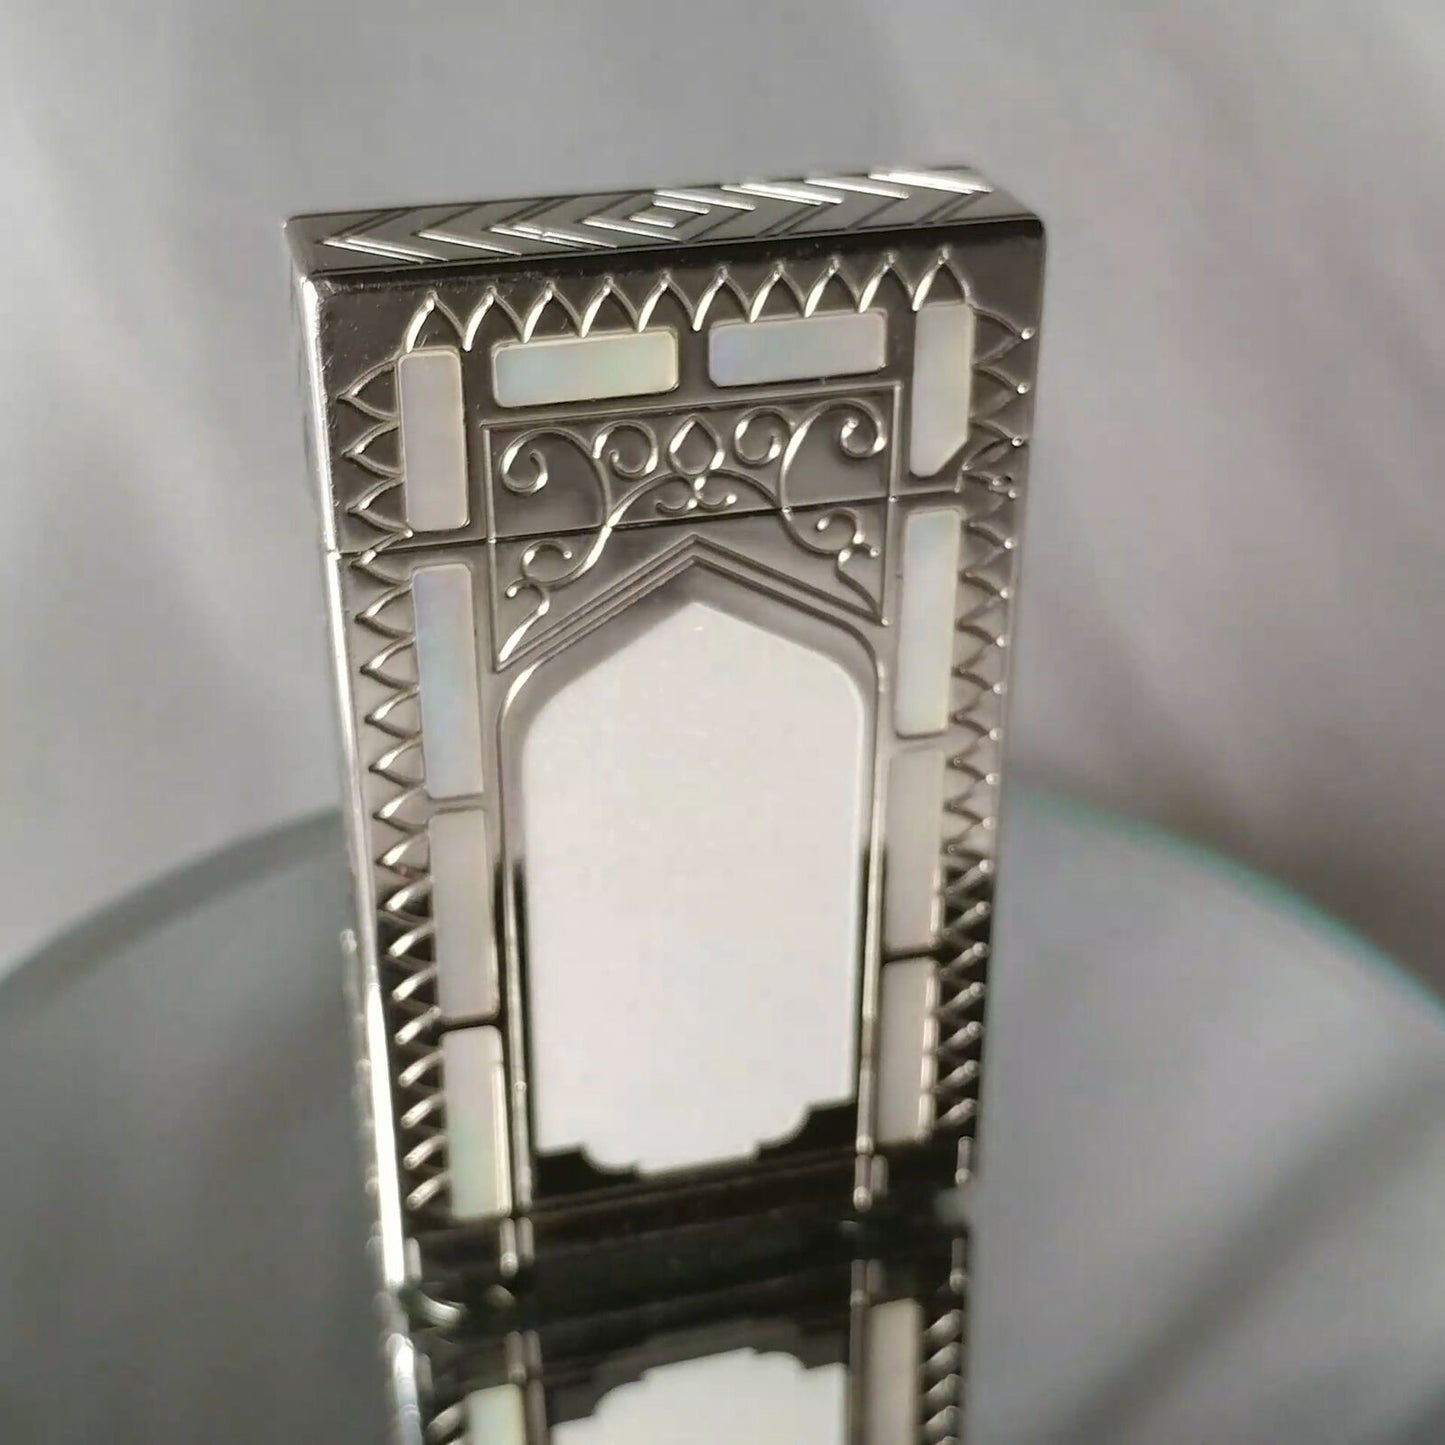 S.T. Dupont Taj Mahal Limited Edition  Platinum and Mother-of-Pearl Lighter